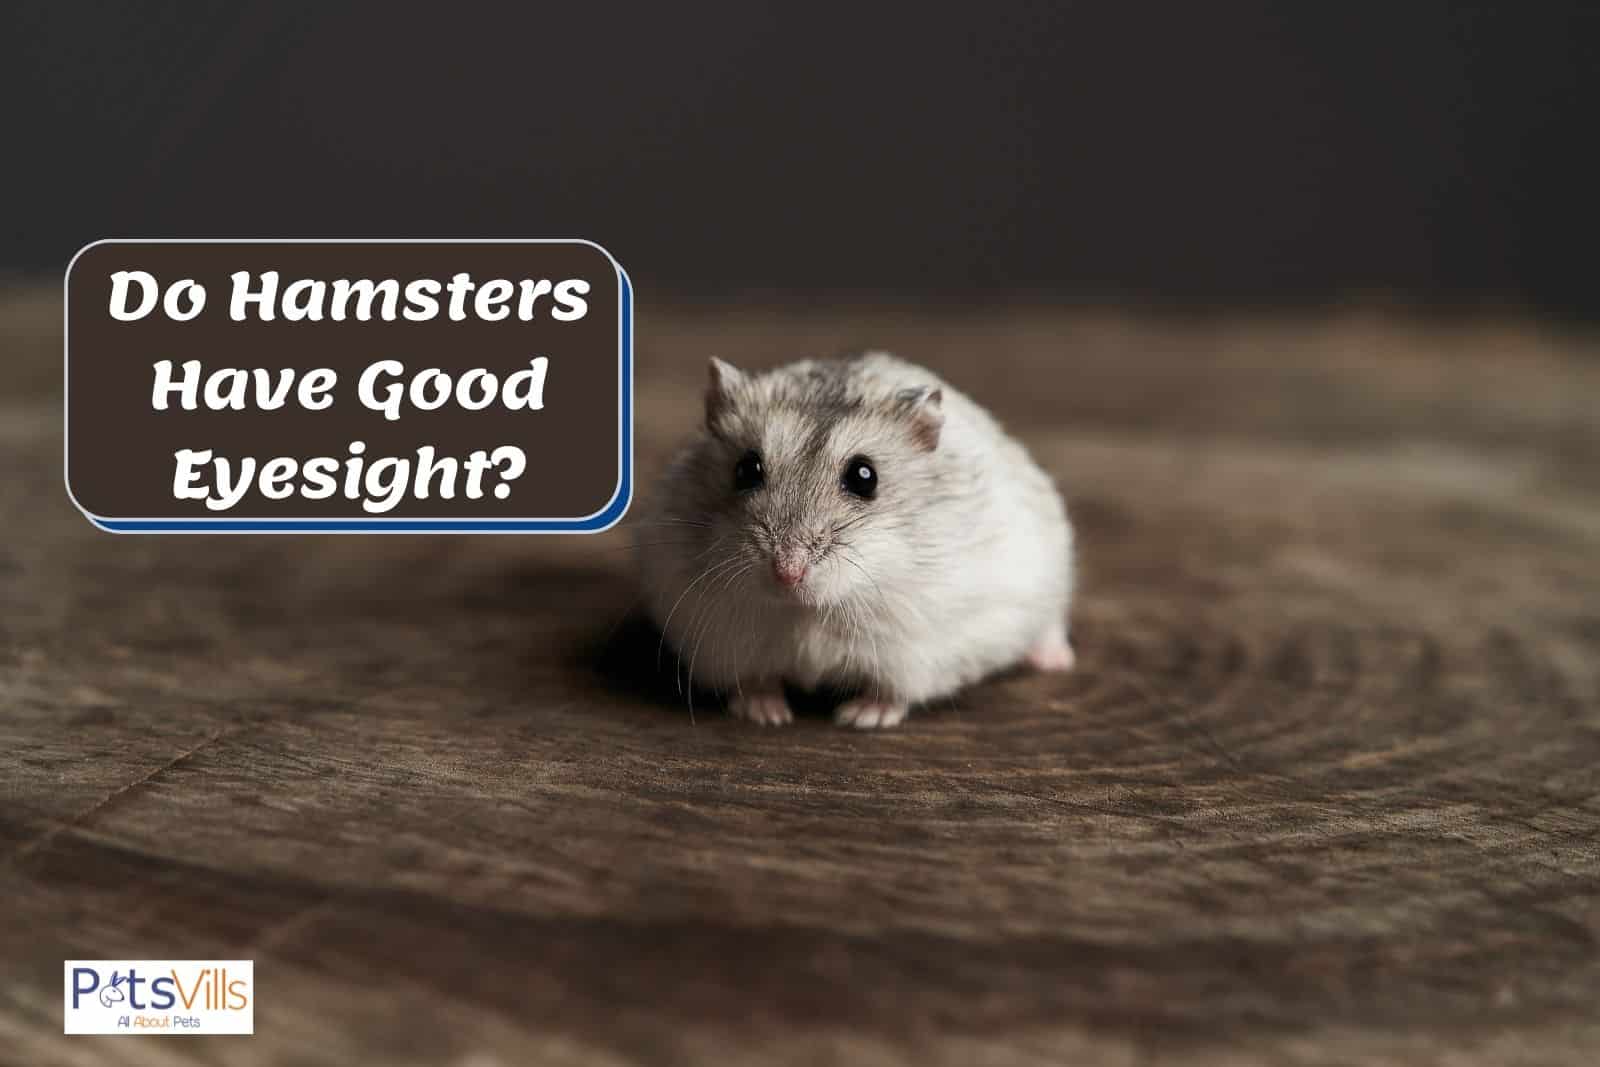 a white hamster, do hamsters have good sight